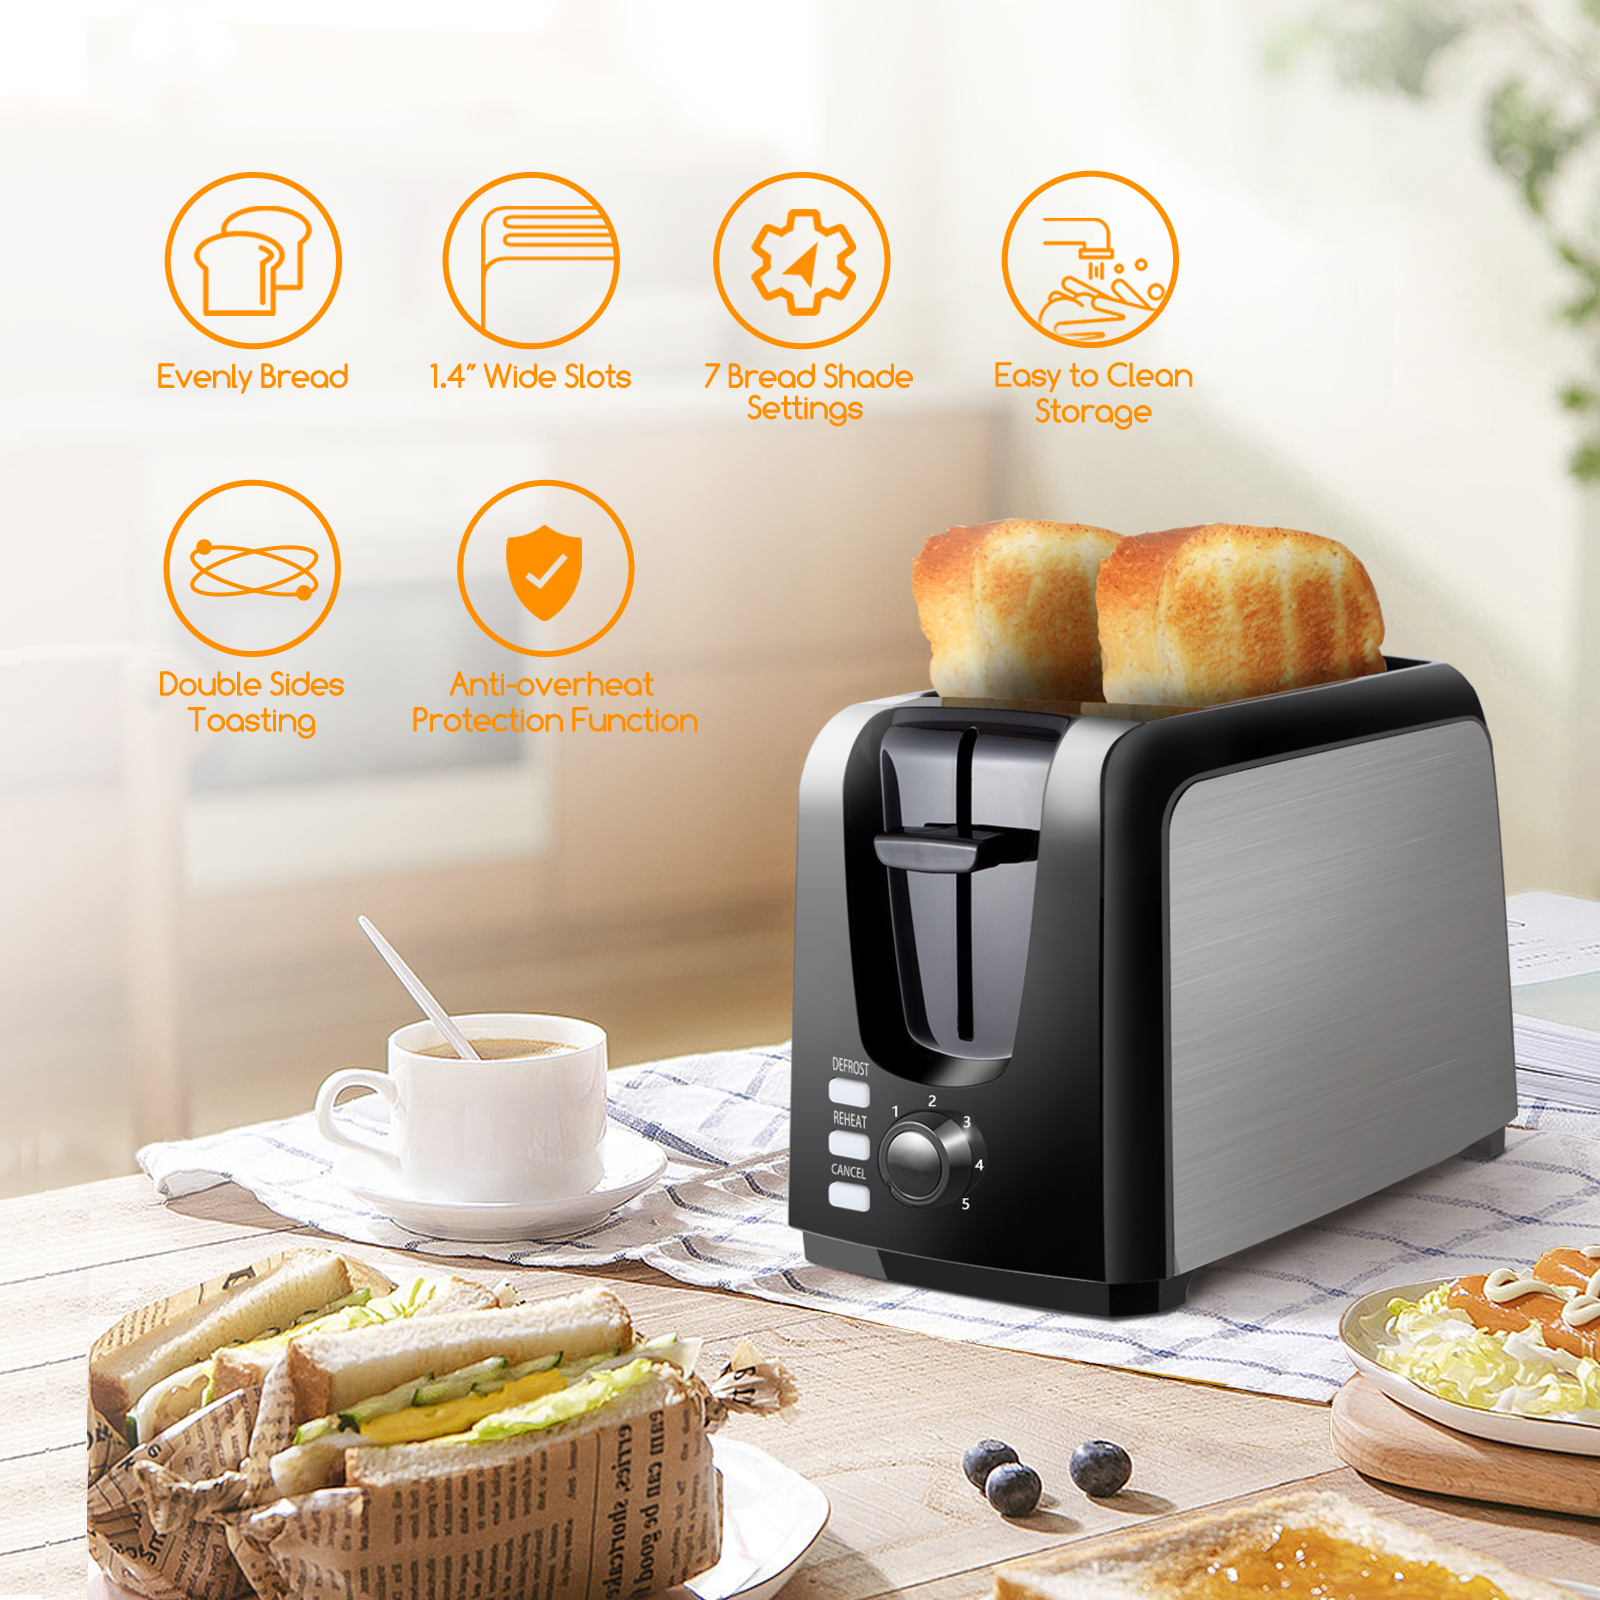 Toaster 2 Slice best rated prime Evenly And Quickly Black Bagel Toaster With 2 Wide Slots 7 Shade Settings and Removable Crumb Tray for Bread Waffles 